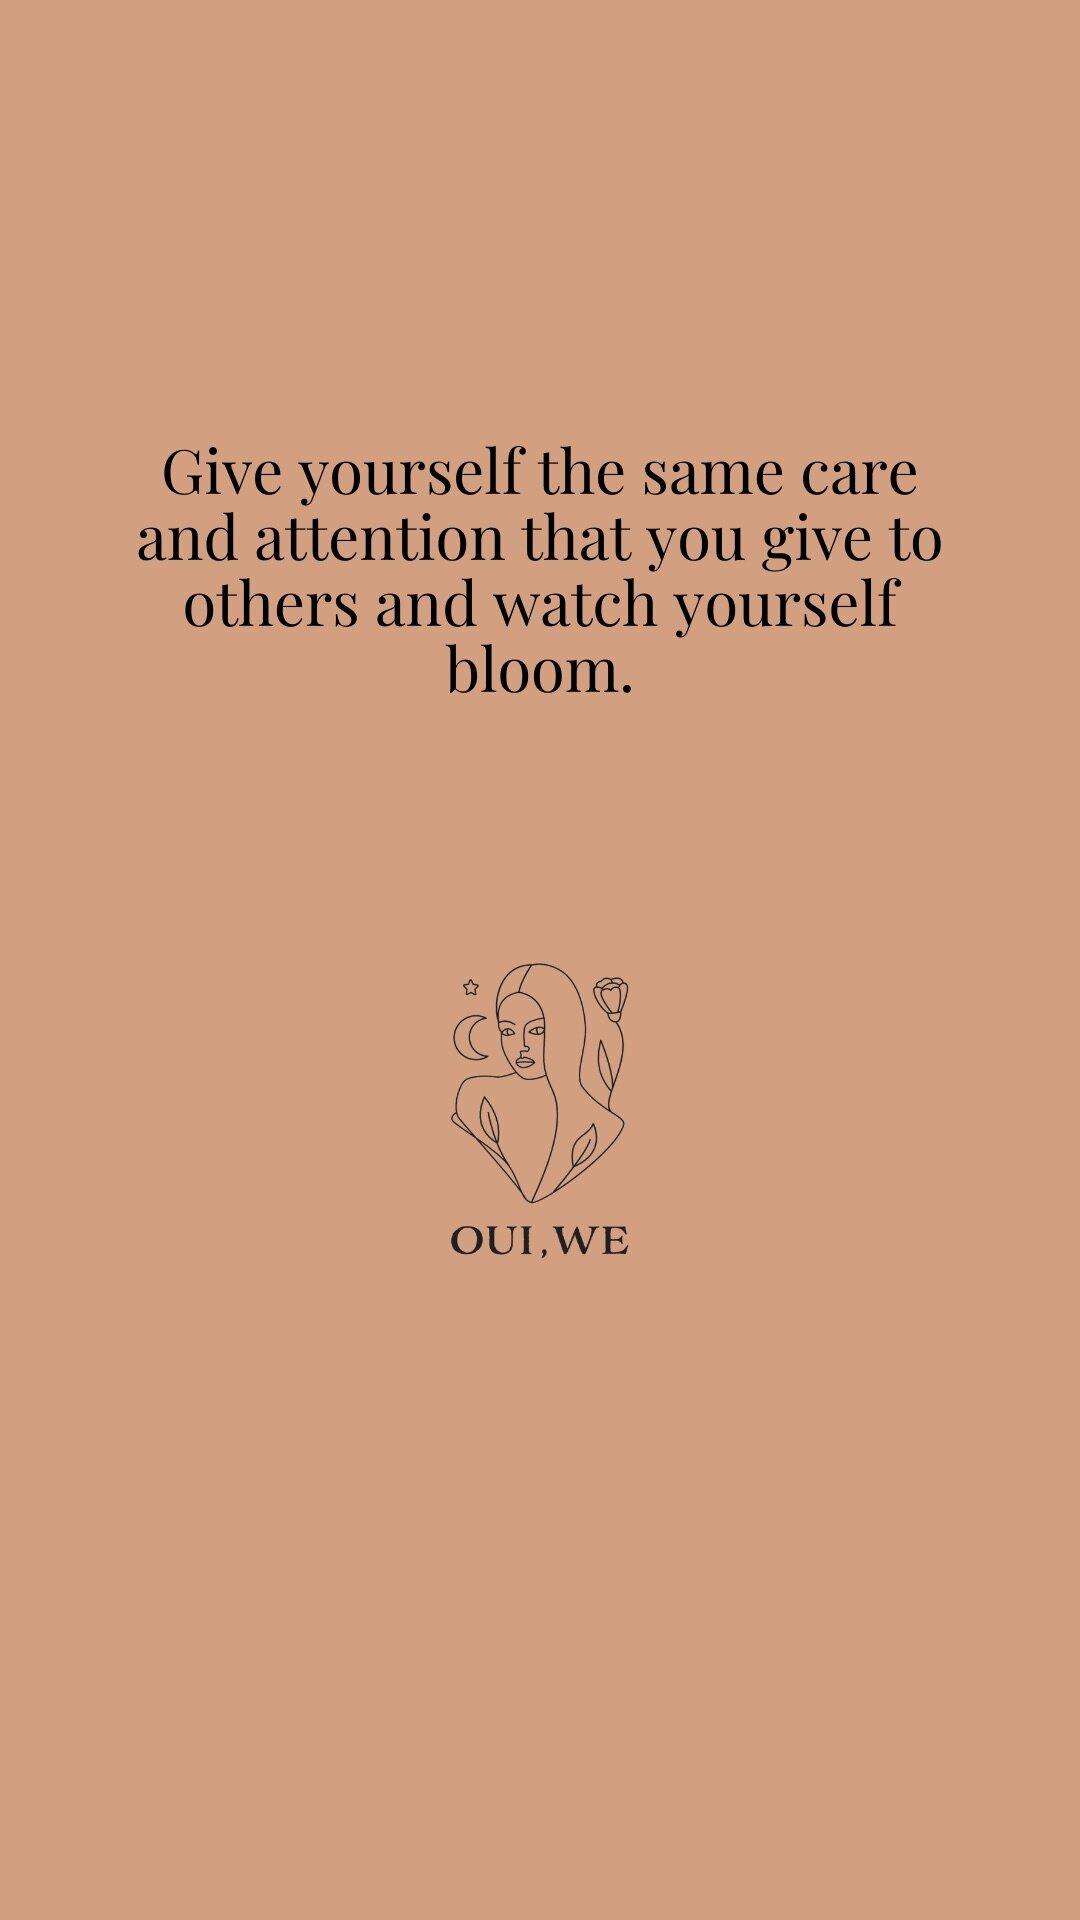 Inspirational SelfLove Quotes For Women  50 Free Phone Wallpapers 